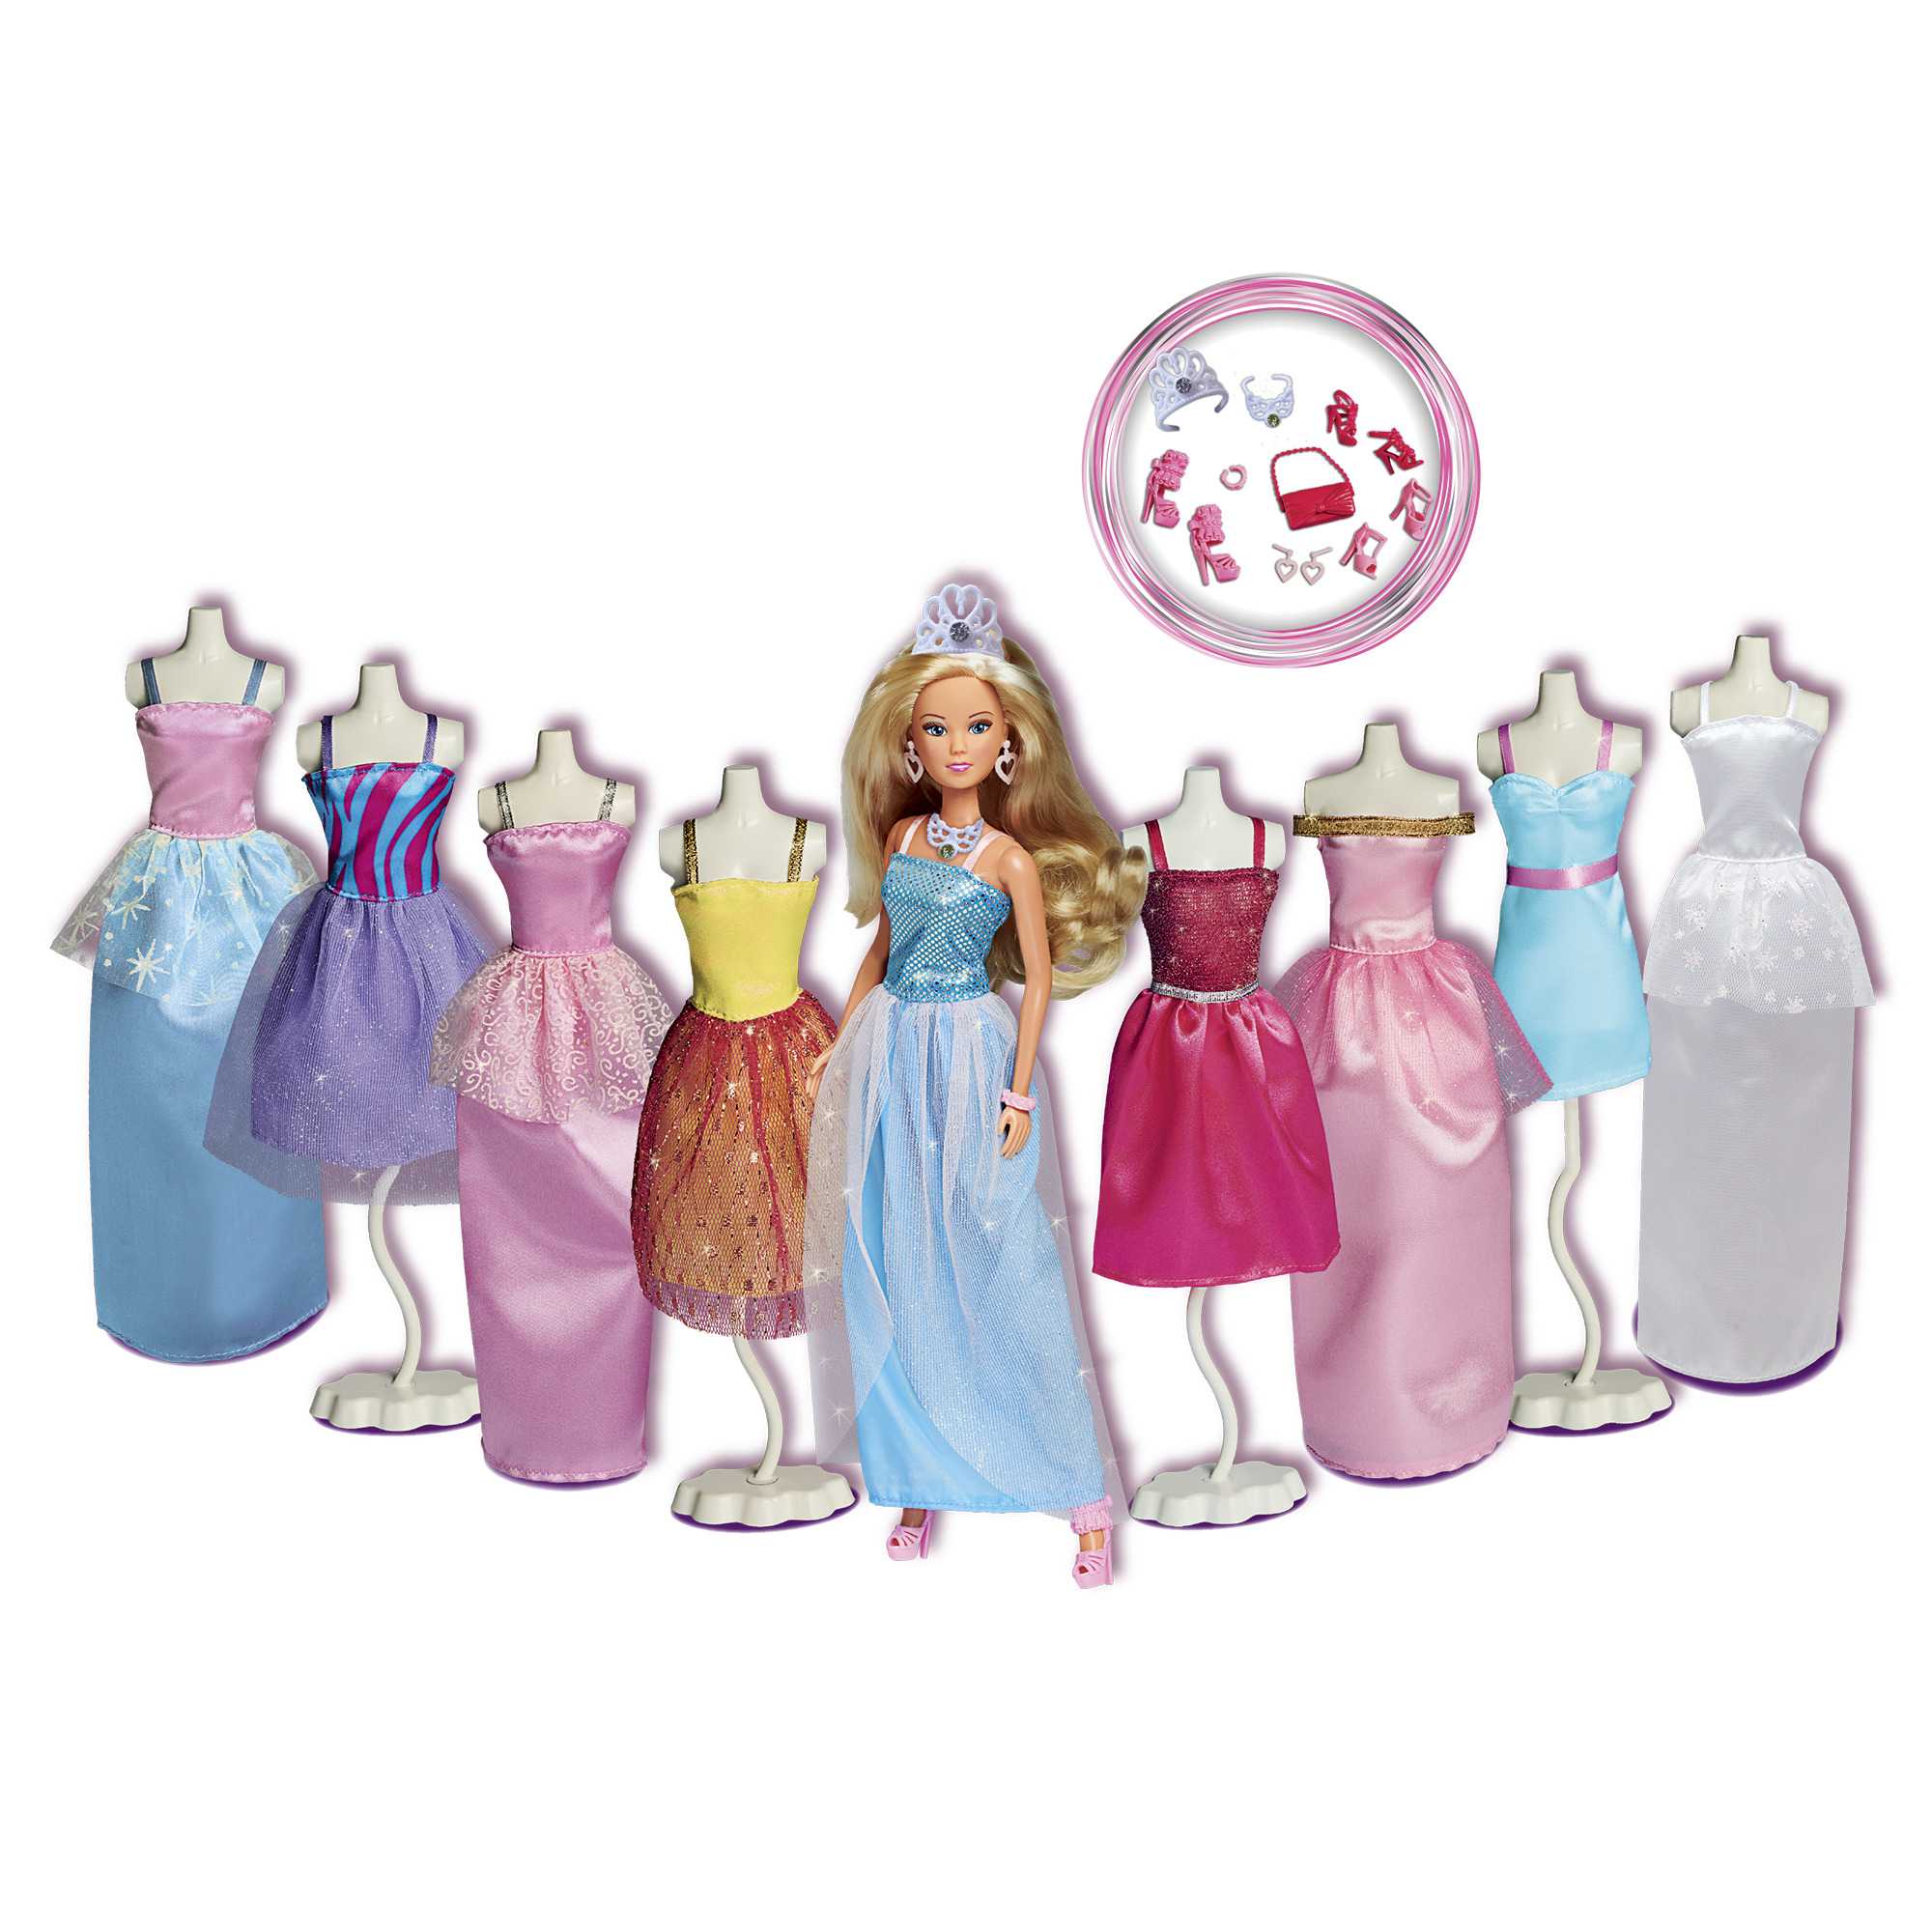 Lolly deluxe dresses set - LOLLY